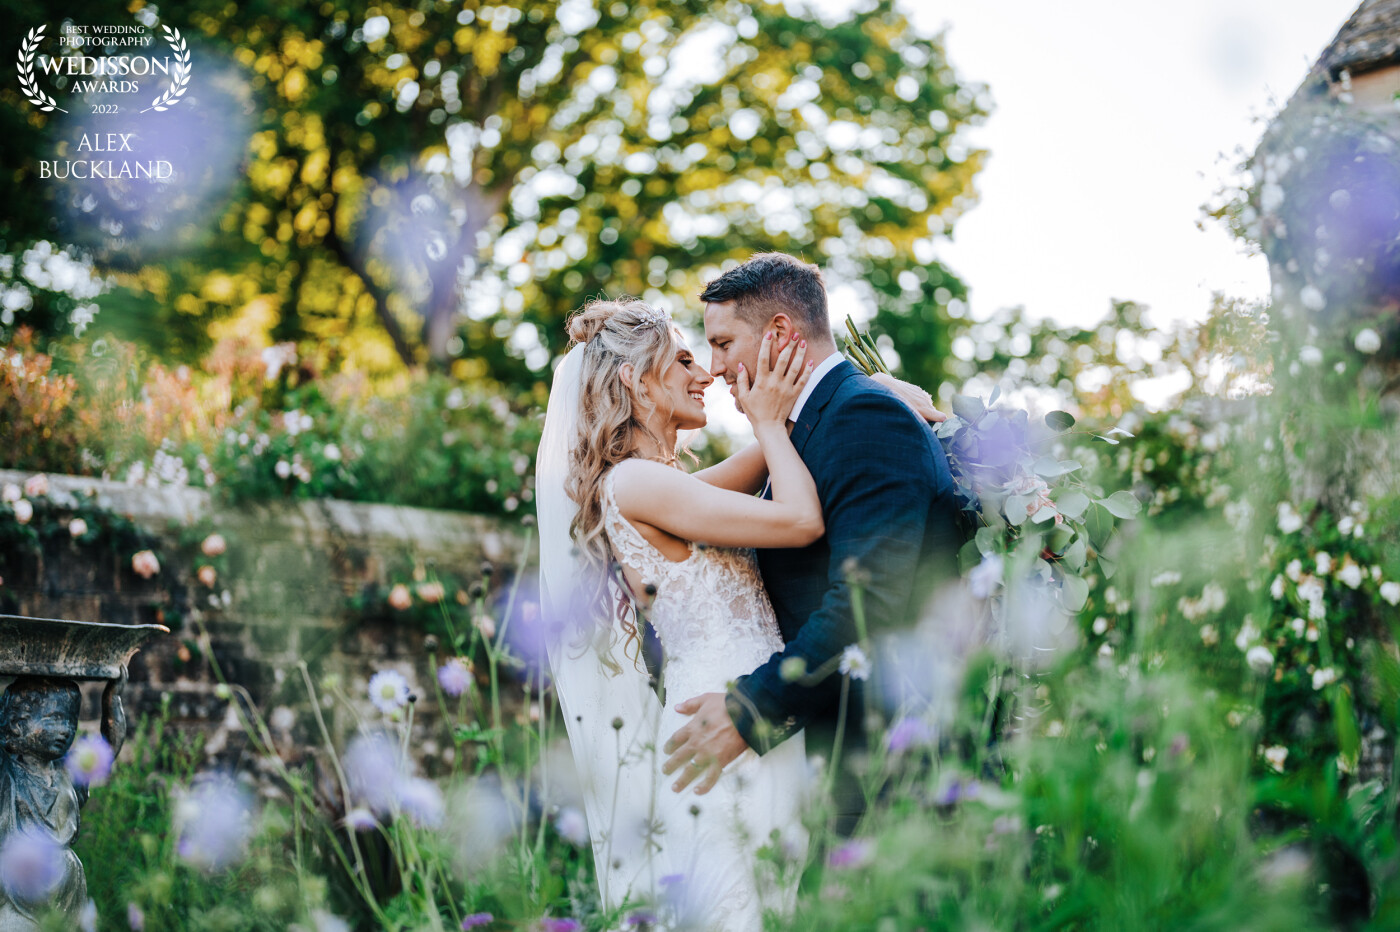 This was captured using my new 50mm 1.2, whilst capturing this couples portrait session, I noticed some wonderful flowers with beautiful colours in the venues gardens which I knew would work as great foreground bokeh. I asked the couple to get close and intimate with one another and this wonderful moment was captured!